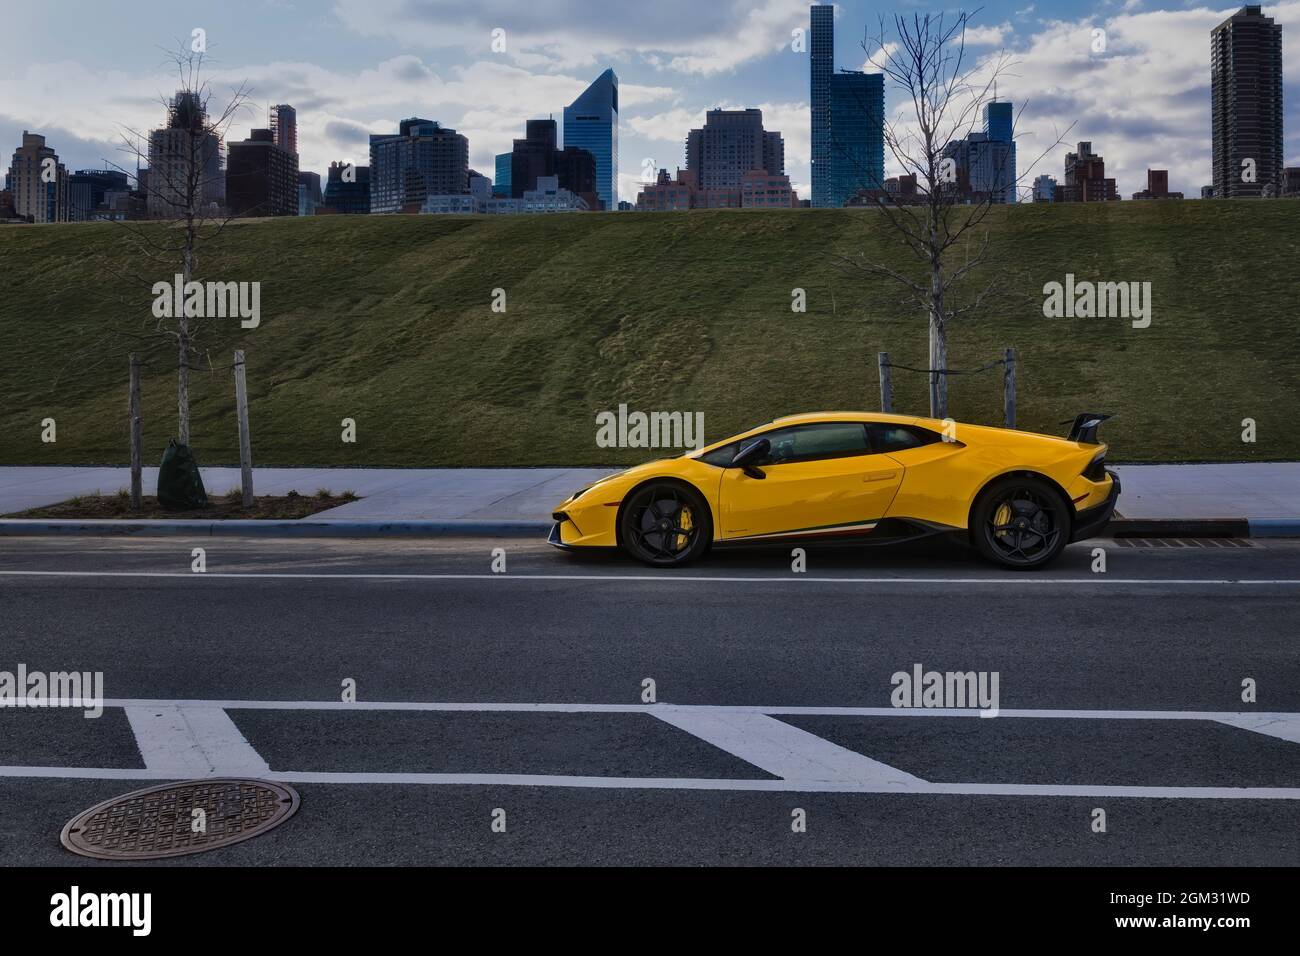 Lamborghini NYC Skyline - A yellow parked Lamborghini vehicle with the upper East Side New York City Skyline.  This image is available in color as wel Stock Photo